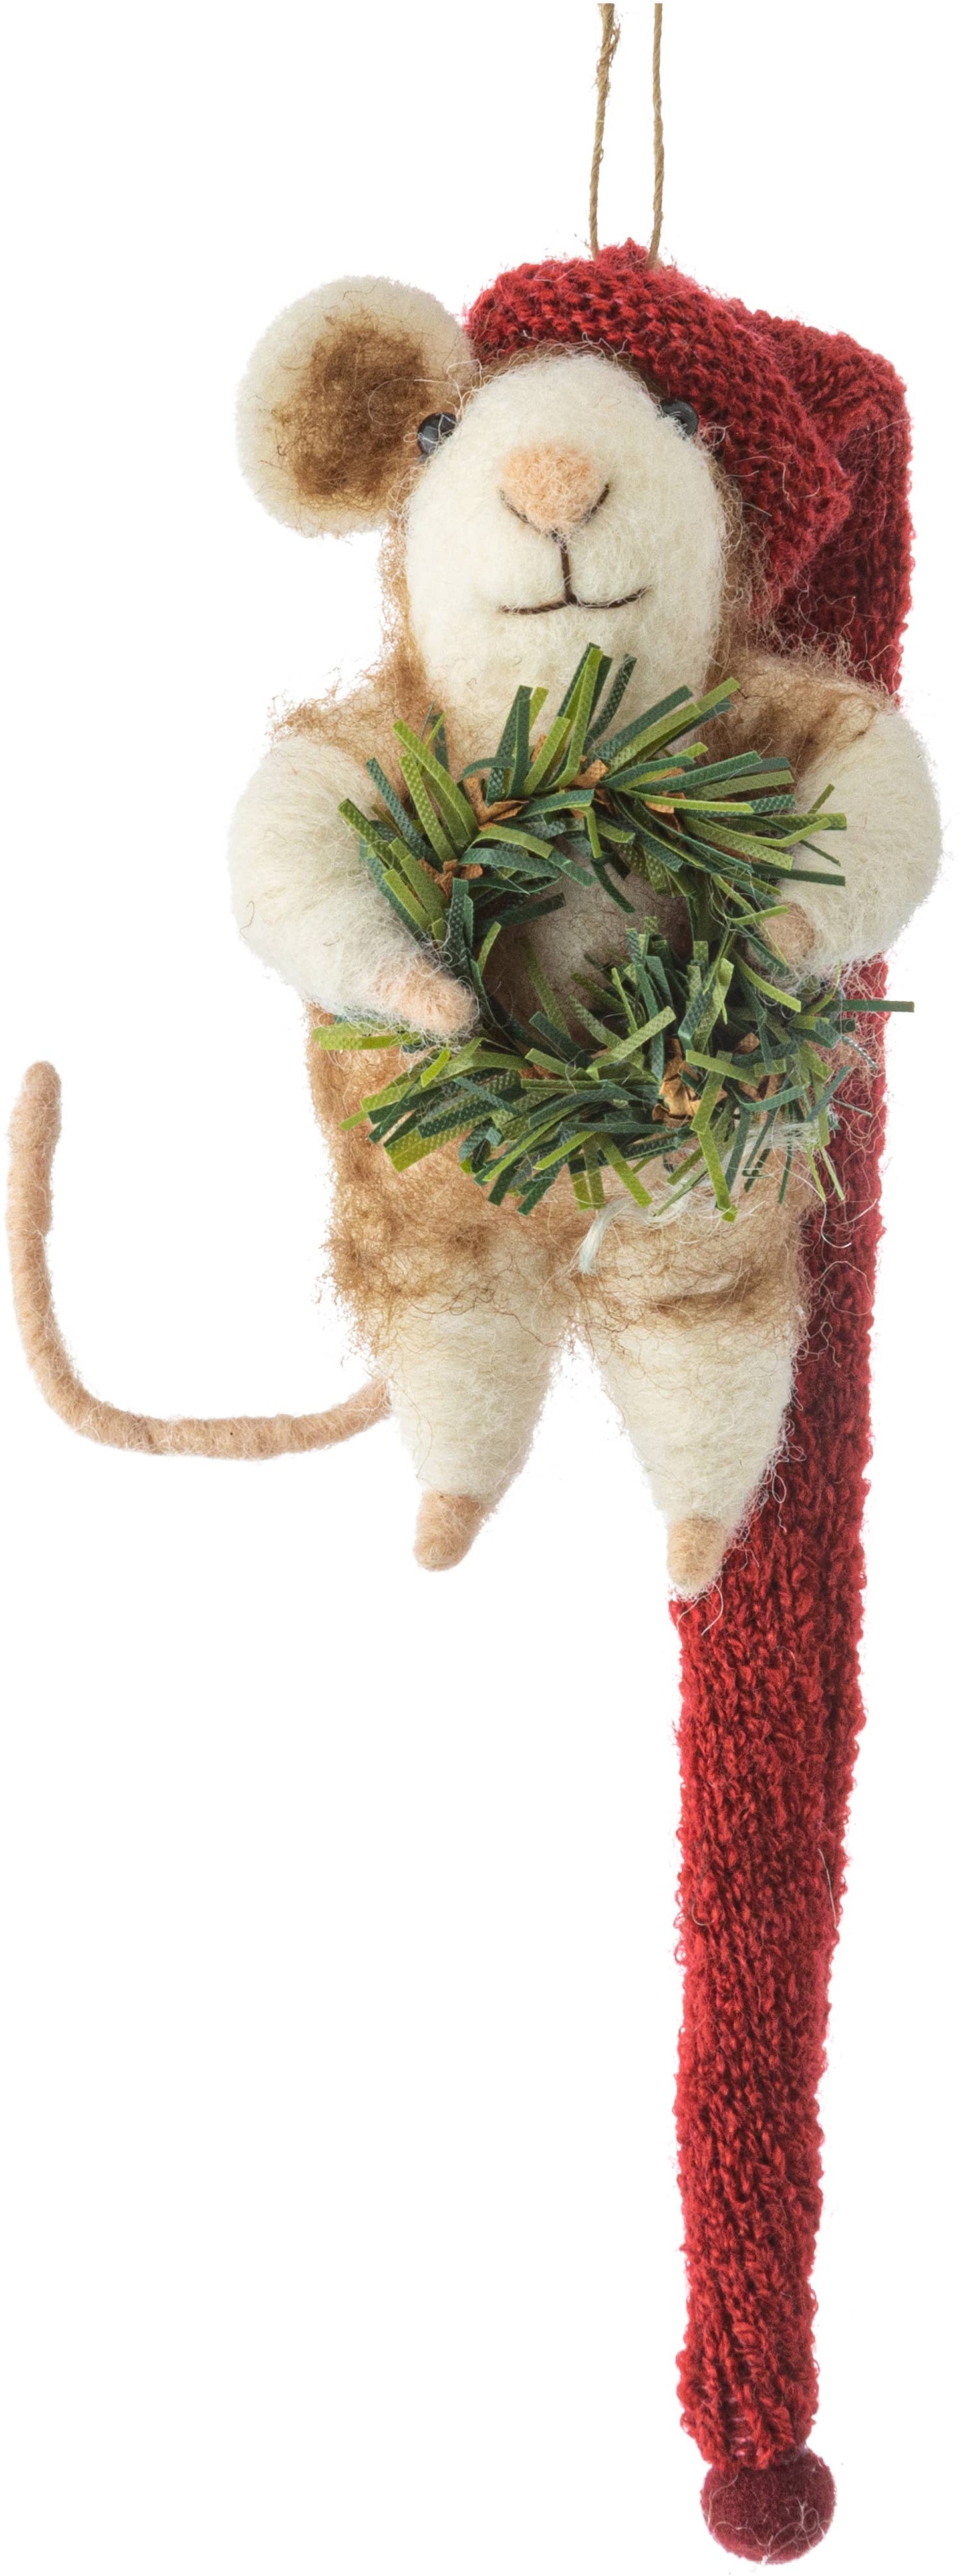 Silver Tree Home & Holiday | Felt Mouse w/ long red knit Santa hat holding wreath